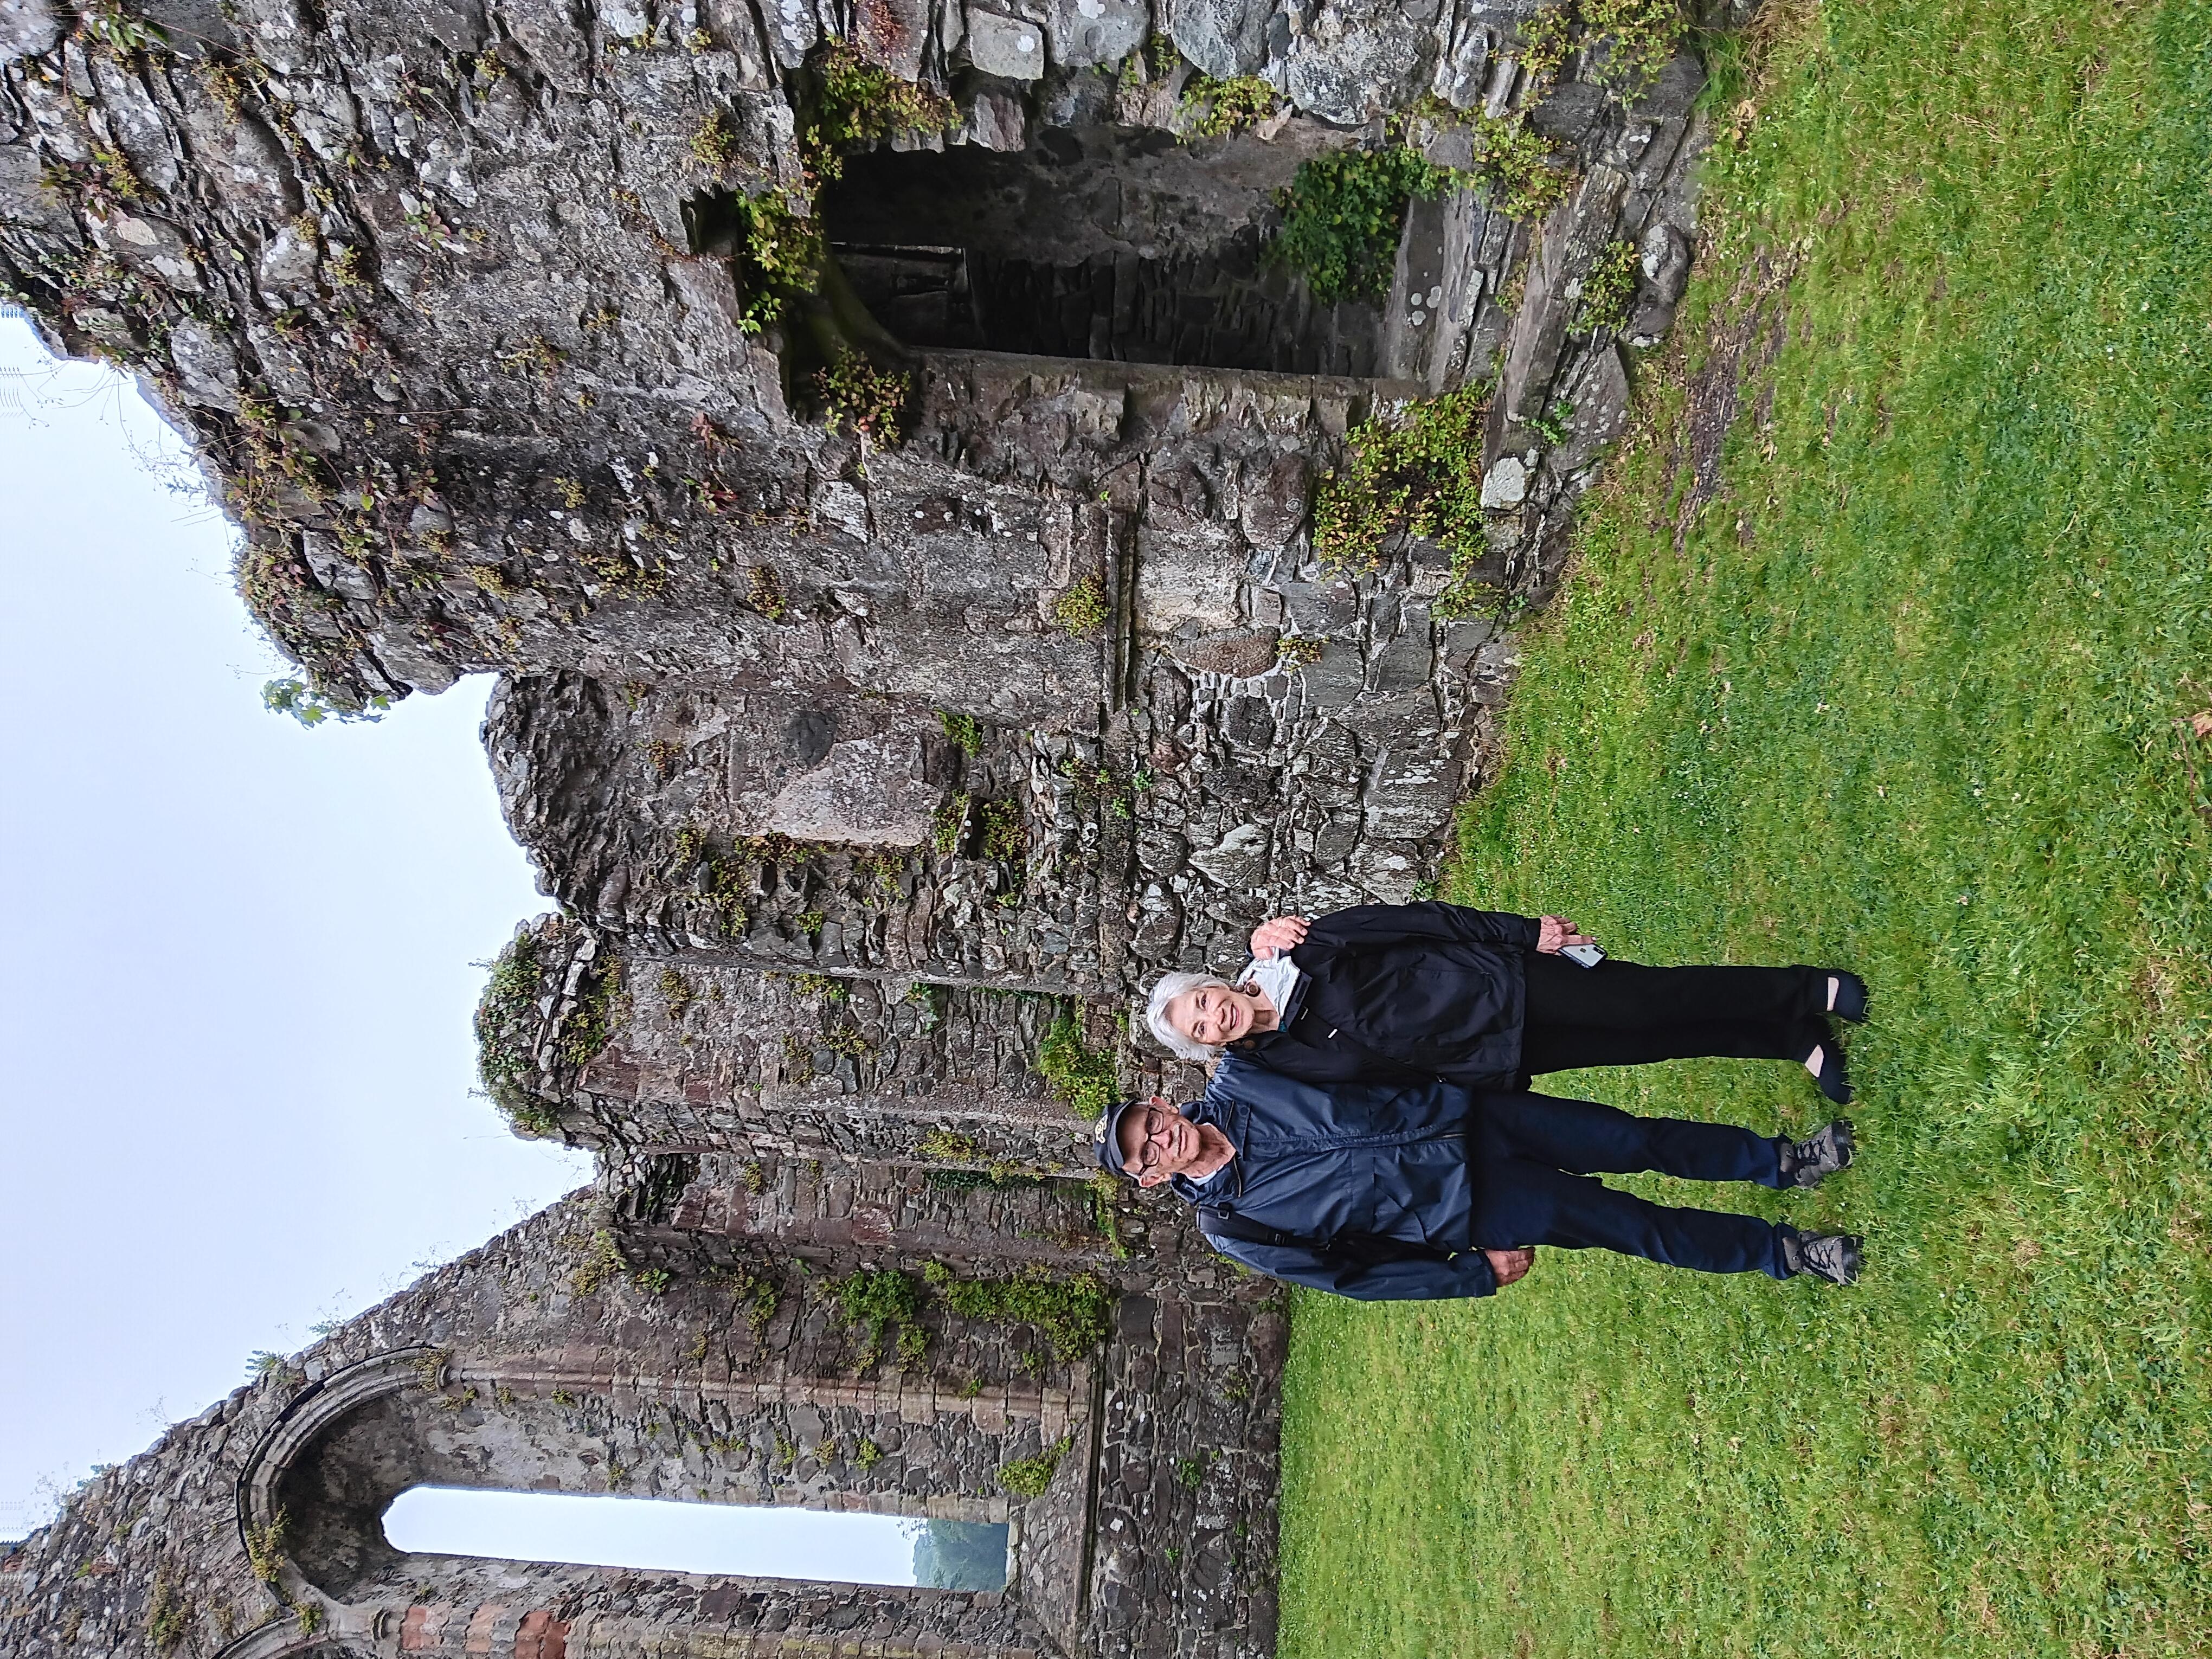 Bob Knott and his sister Judy travel to 1000 yr old Grey Abbey in No. Ireland